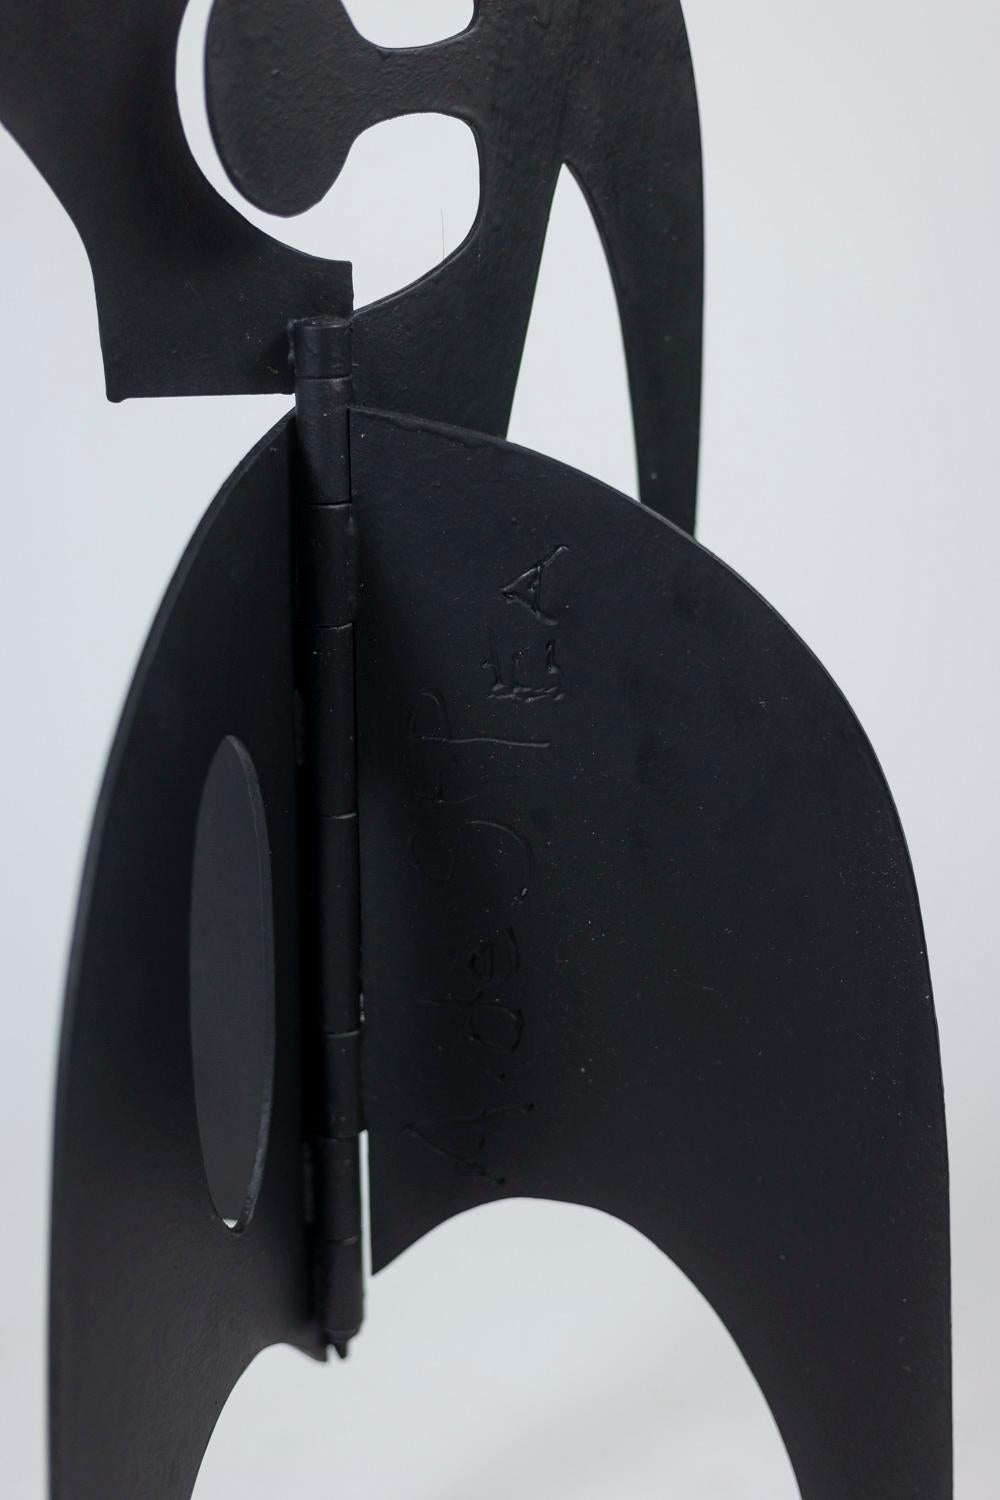 Contemporary Standing sculpture “Jouve”, contemporary work For Sale